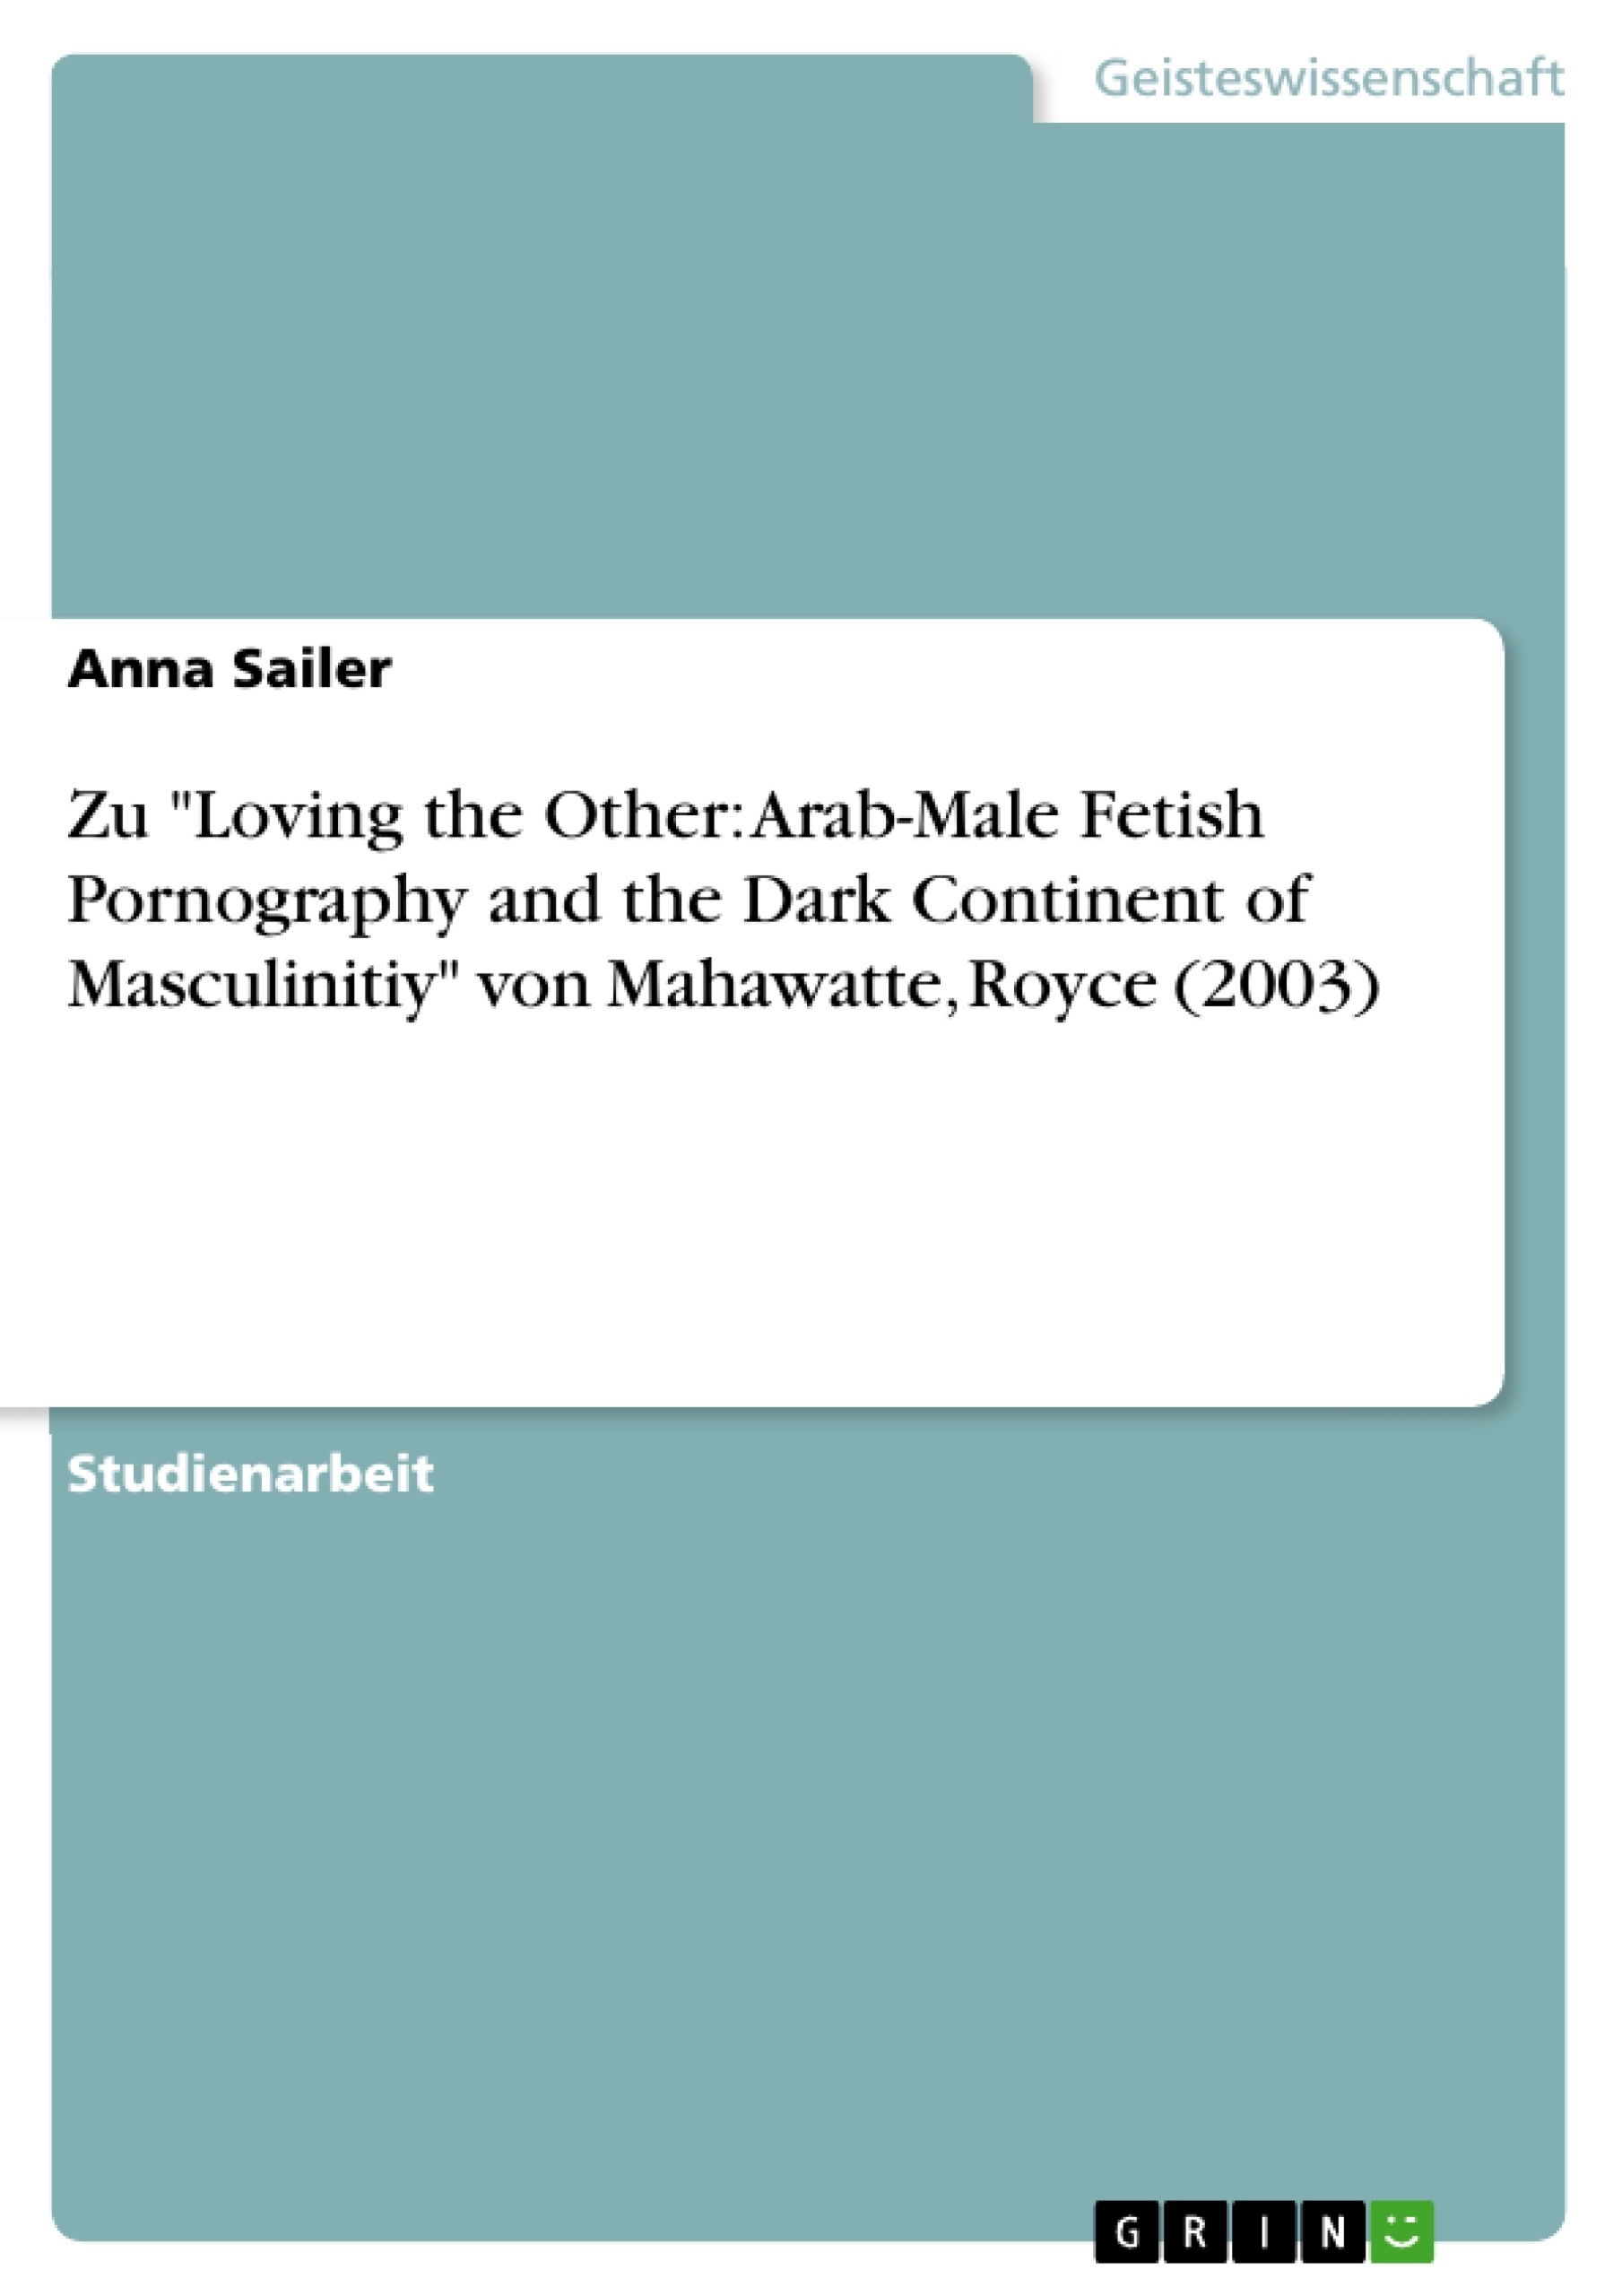 Título: Zu "Loving the Other: Arab-Male Fetish Pornography and the Dark Continent of Masculinitiy" von Mahawatte, Royce (2003)